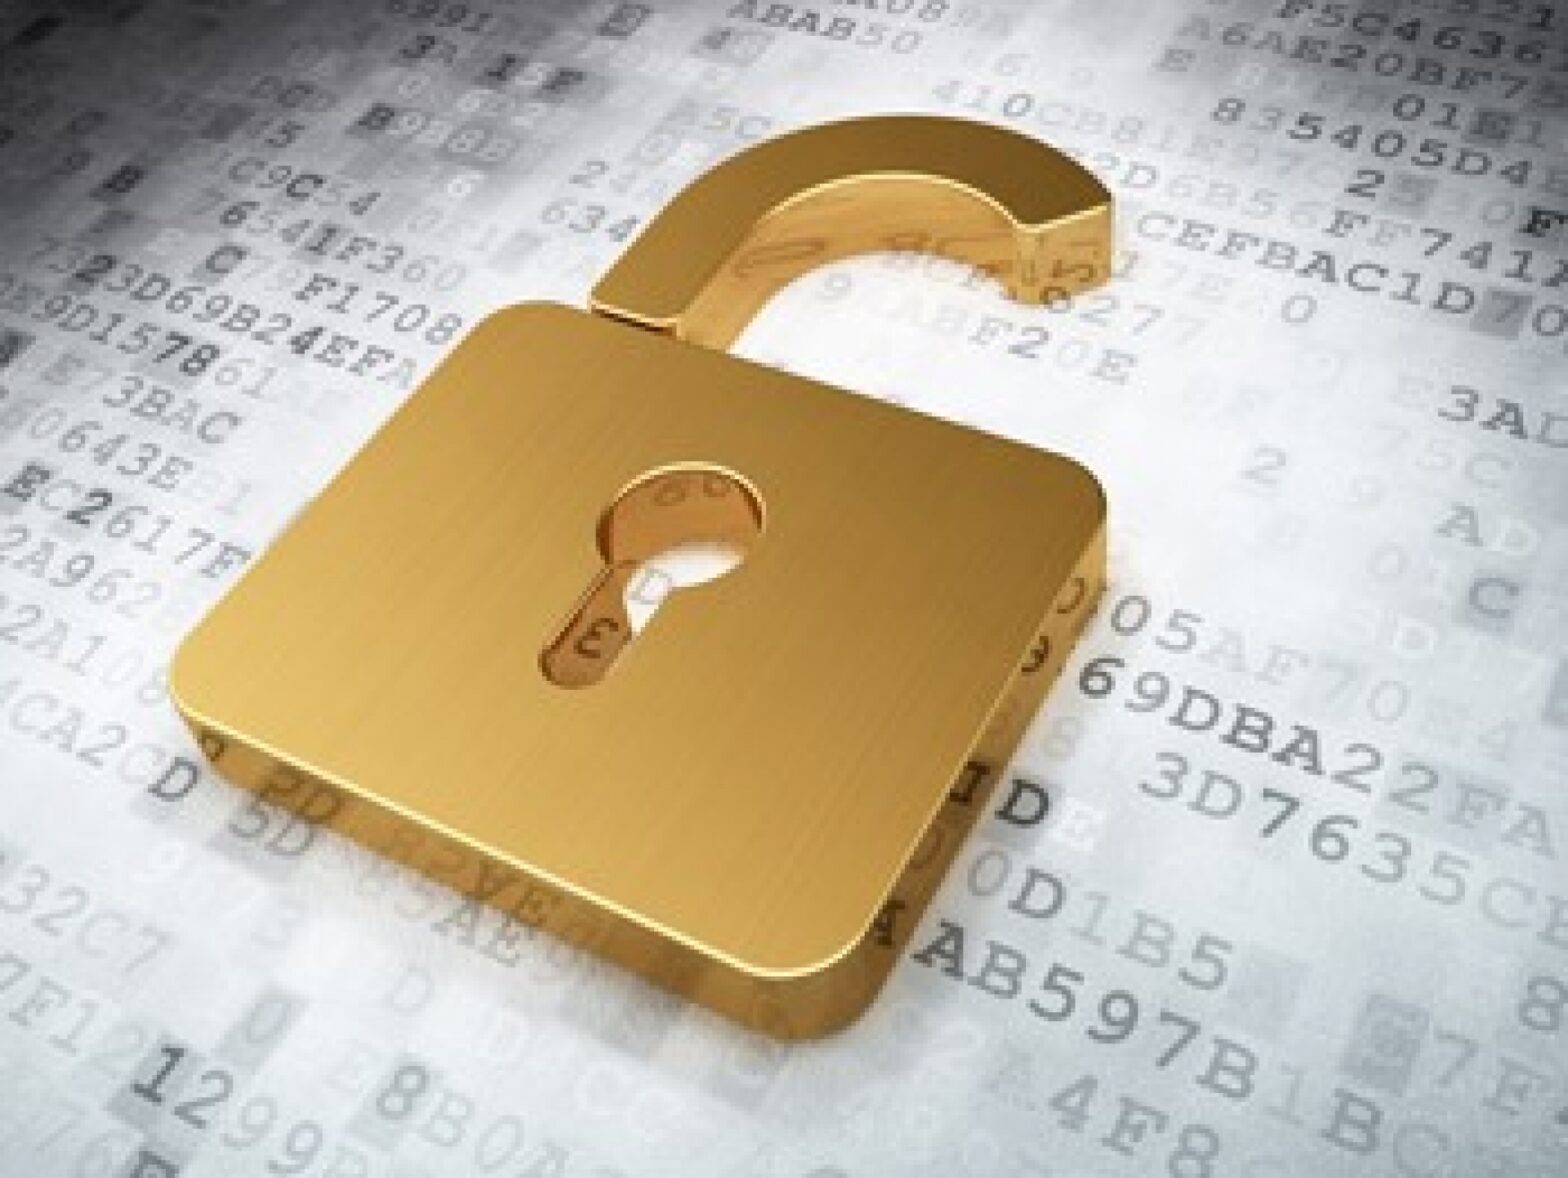 Data Breaches in Healthcare Industry to Increase in 2016